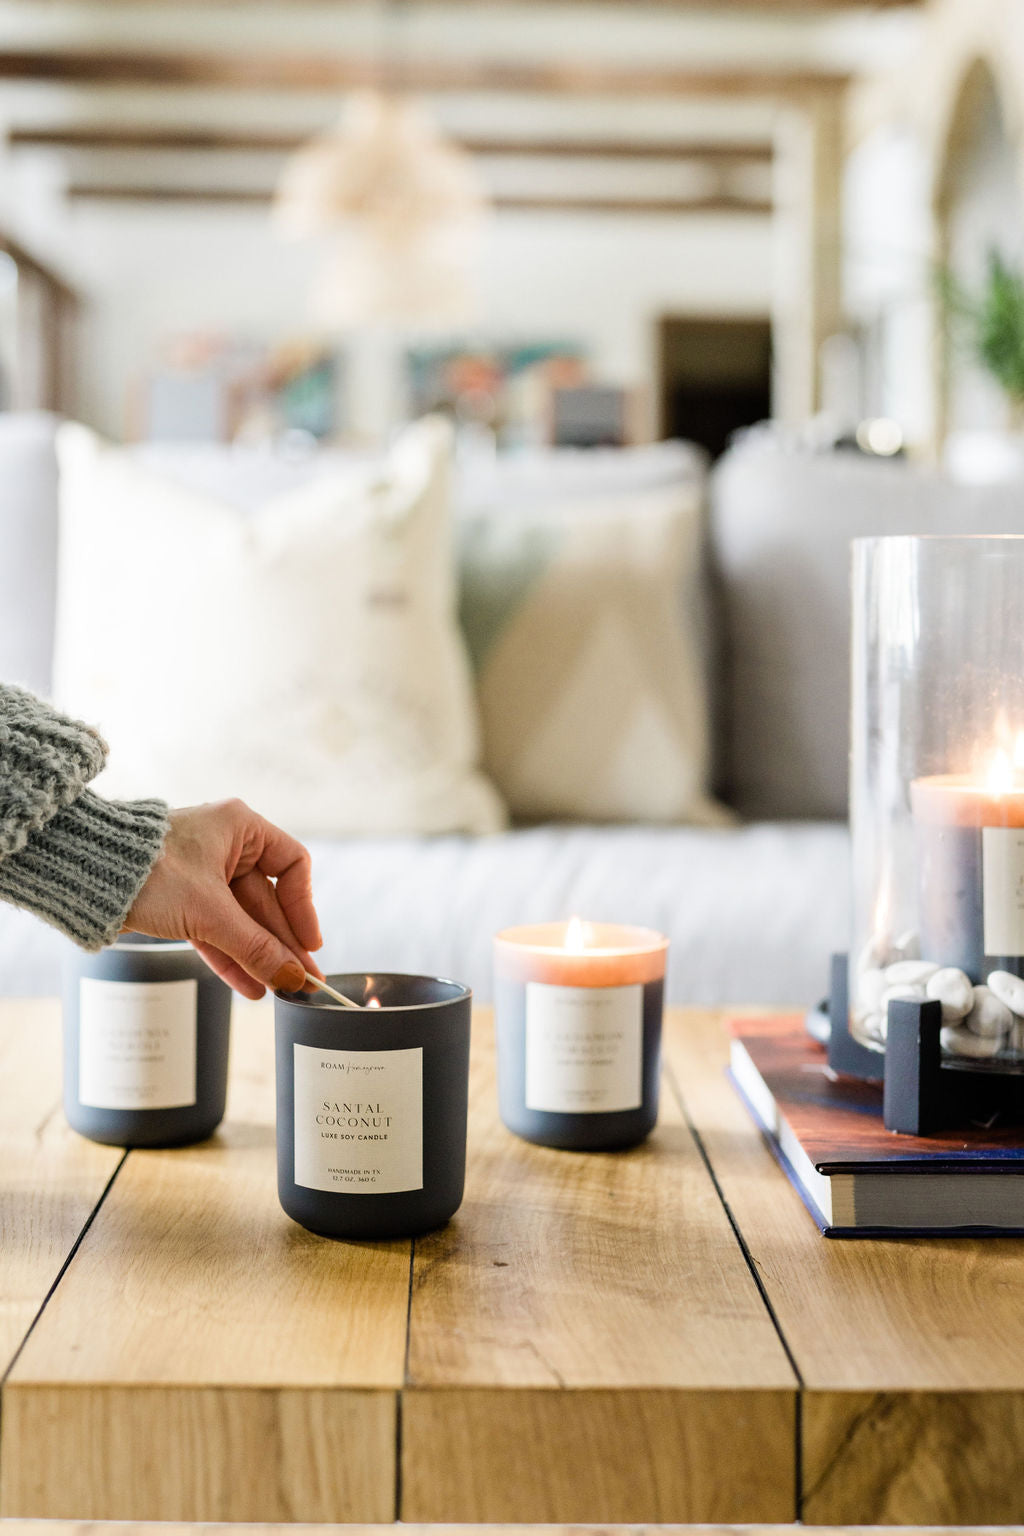 Santal Coconut Luxe Smoke Candle - ROAM Homegrown